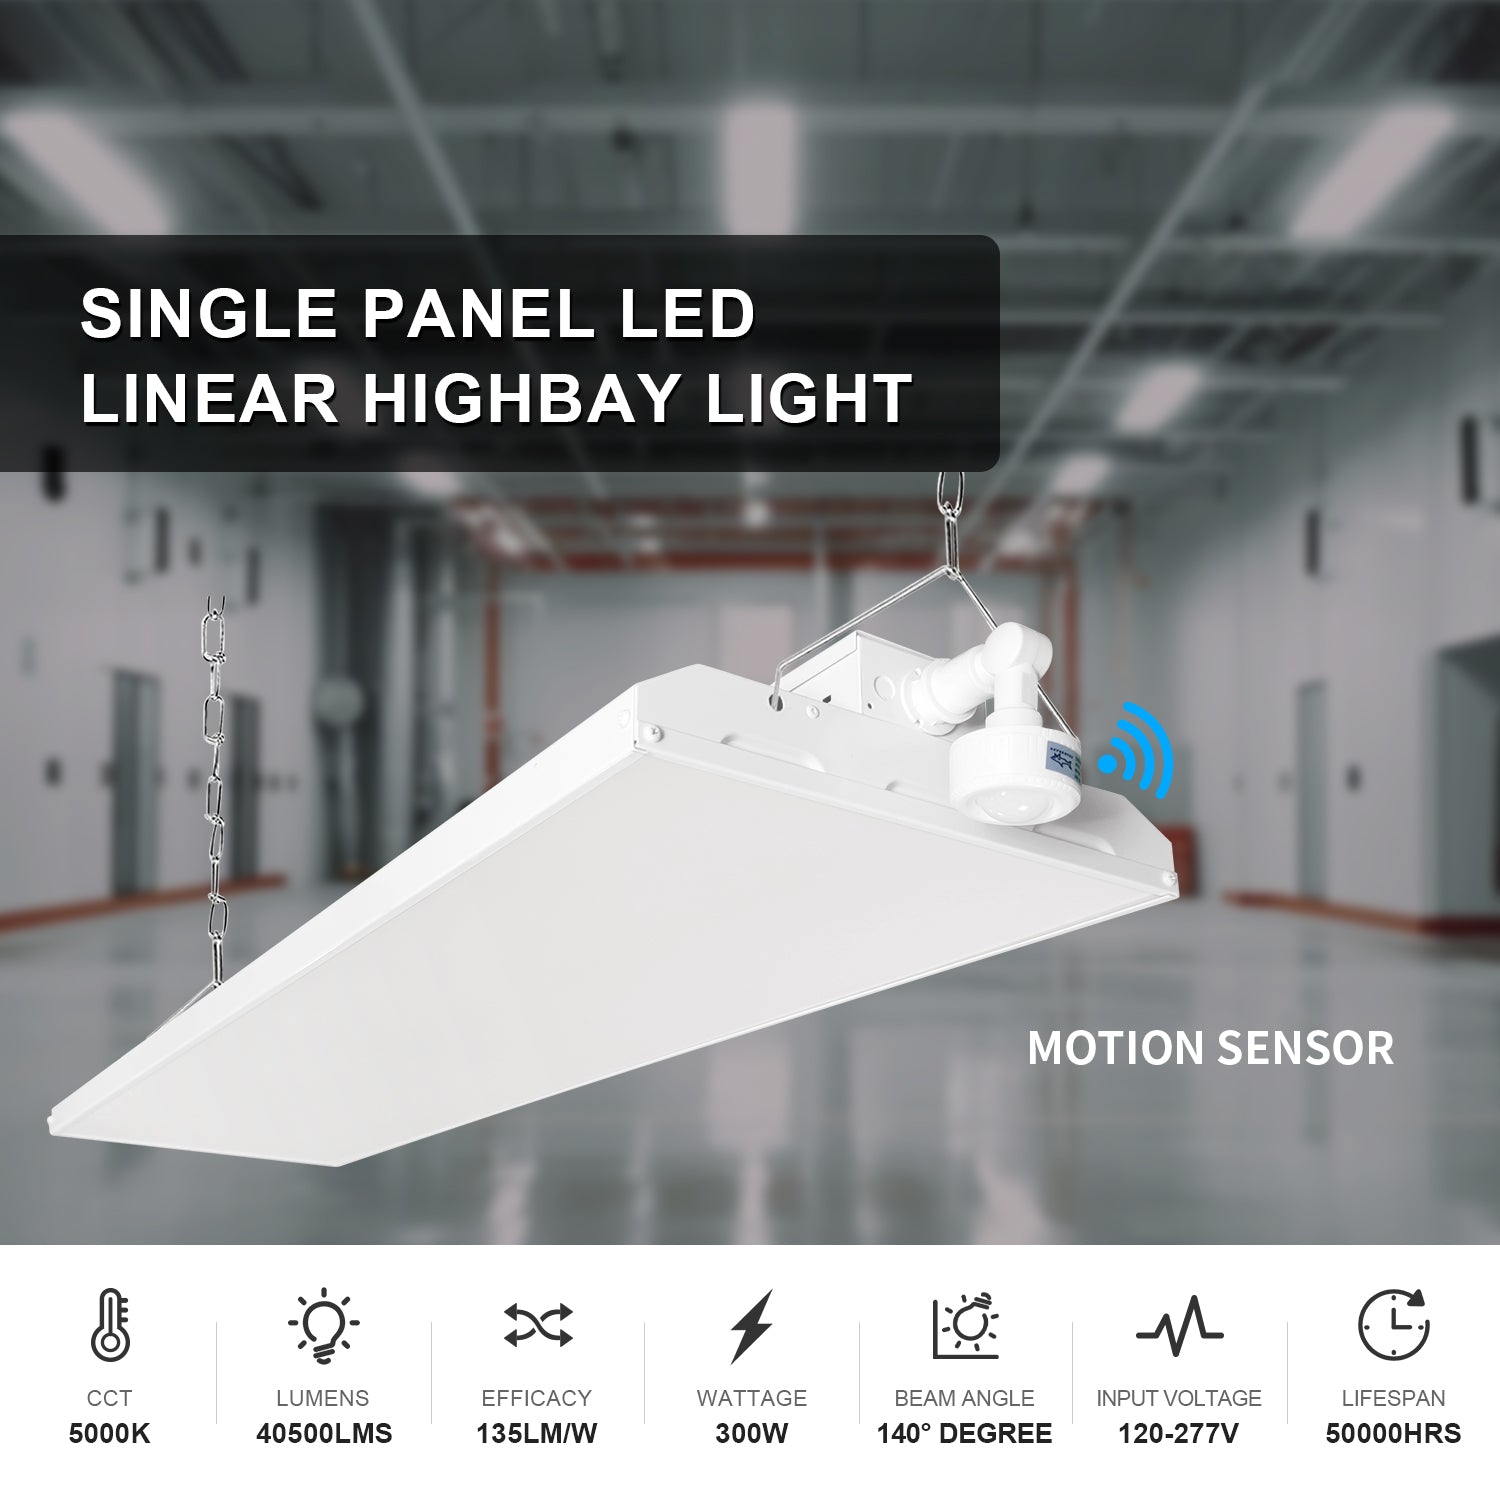 LED High Bay Lights are commercial/industrial light fixtures designed for spaces with 20-foot ceilings or higher. 